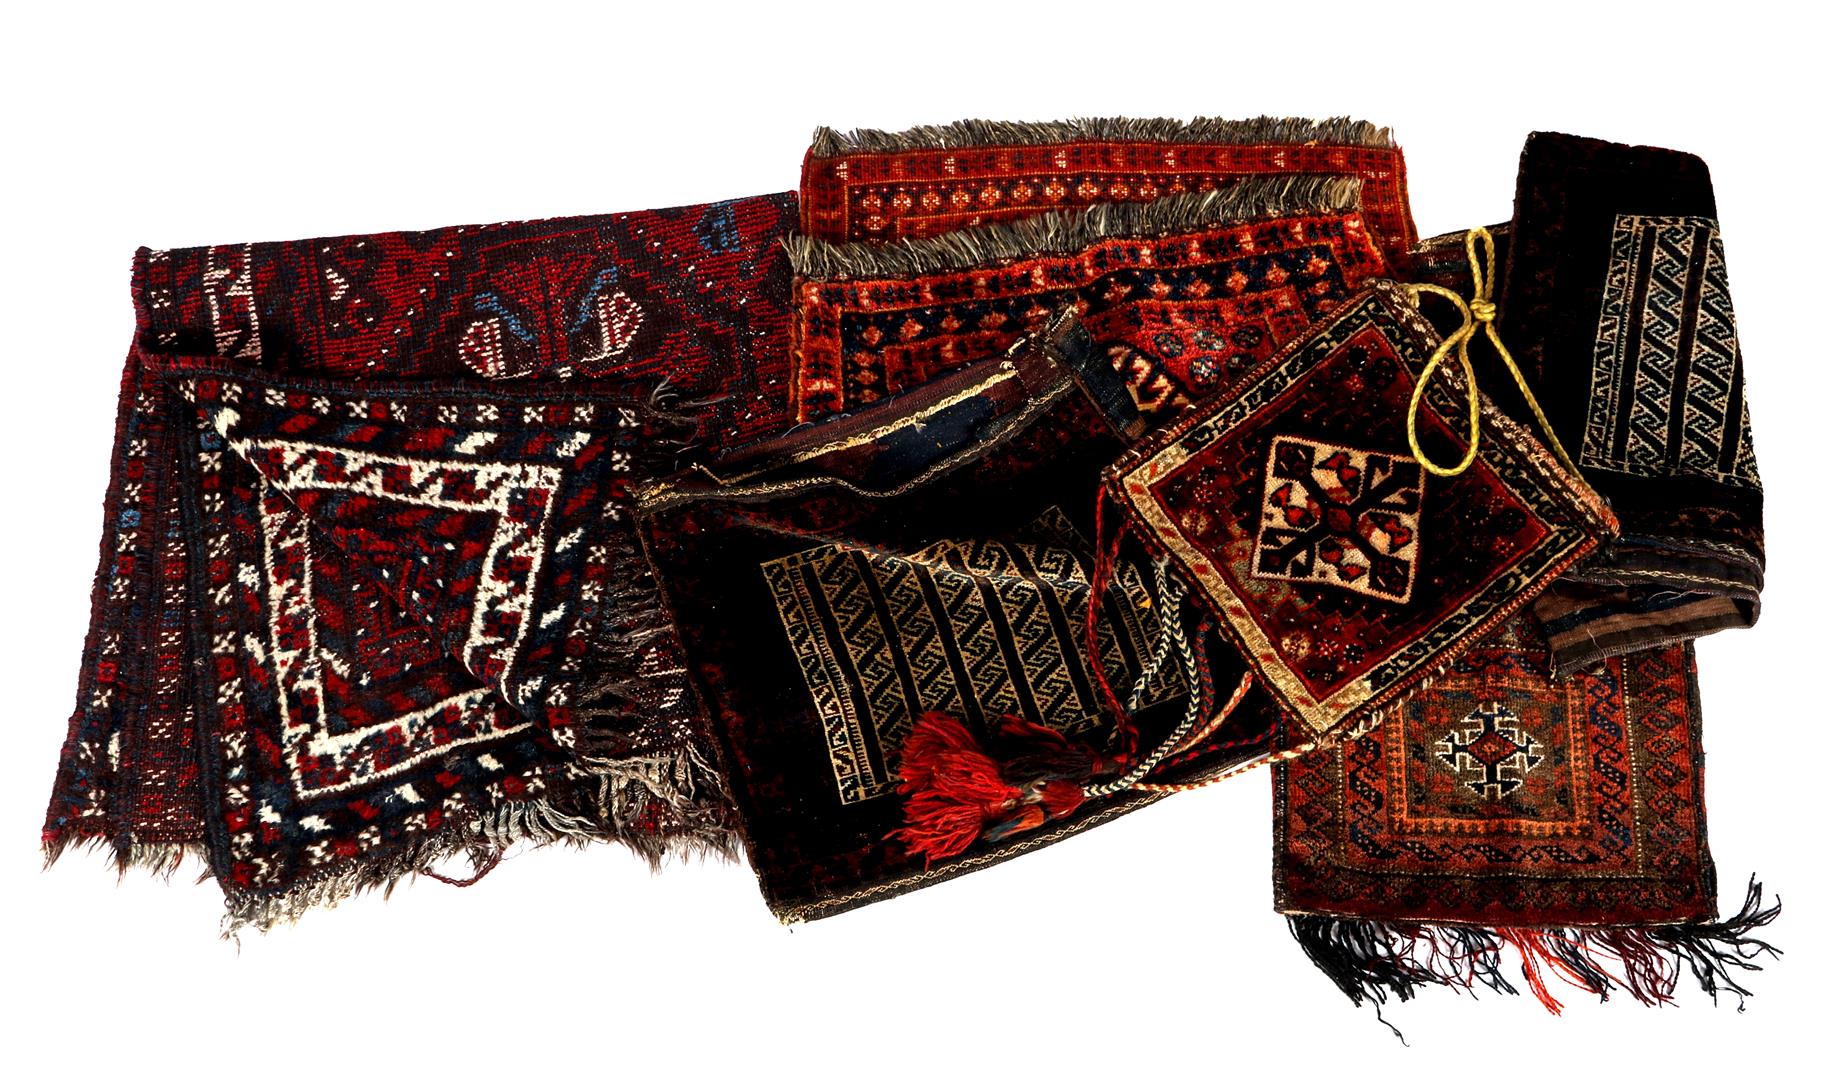 Lot with 6 different oriental textiles